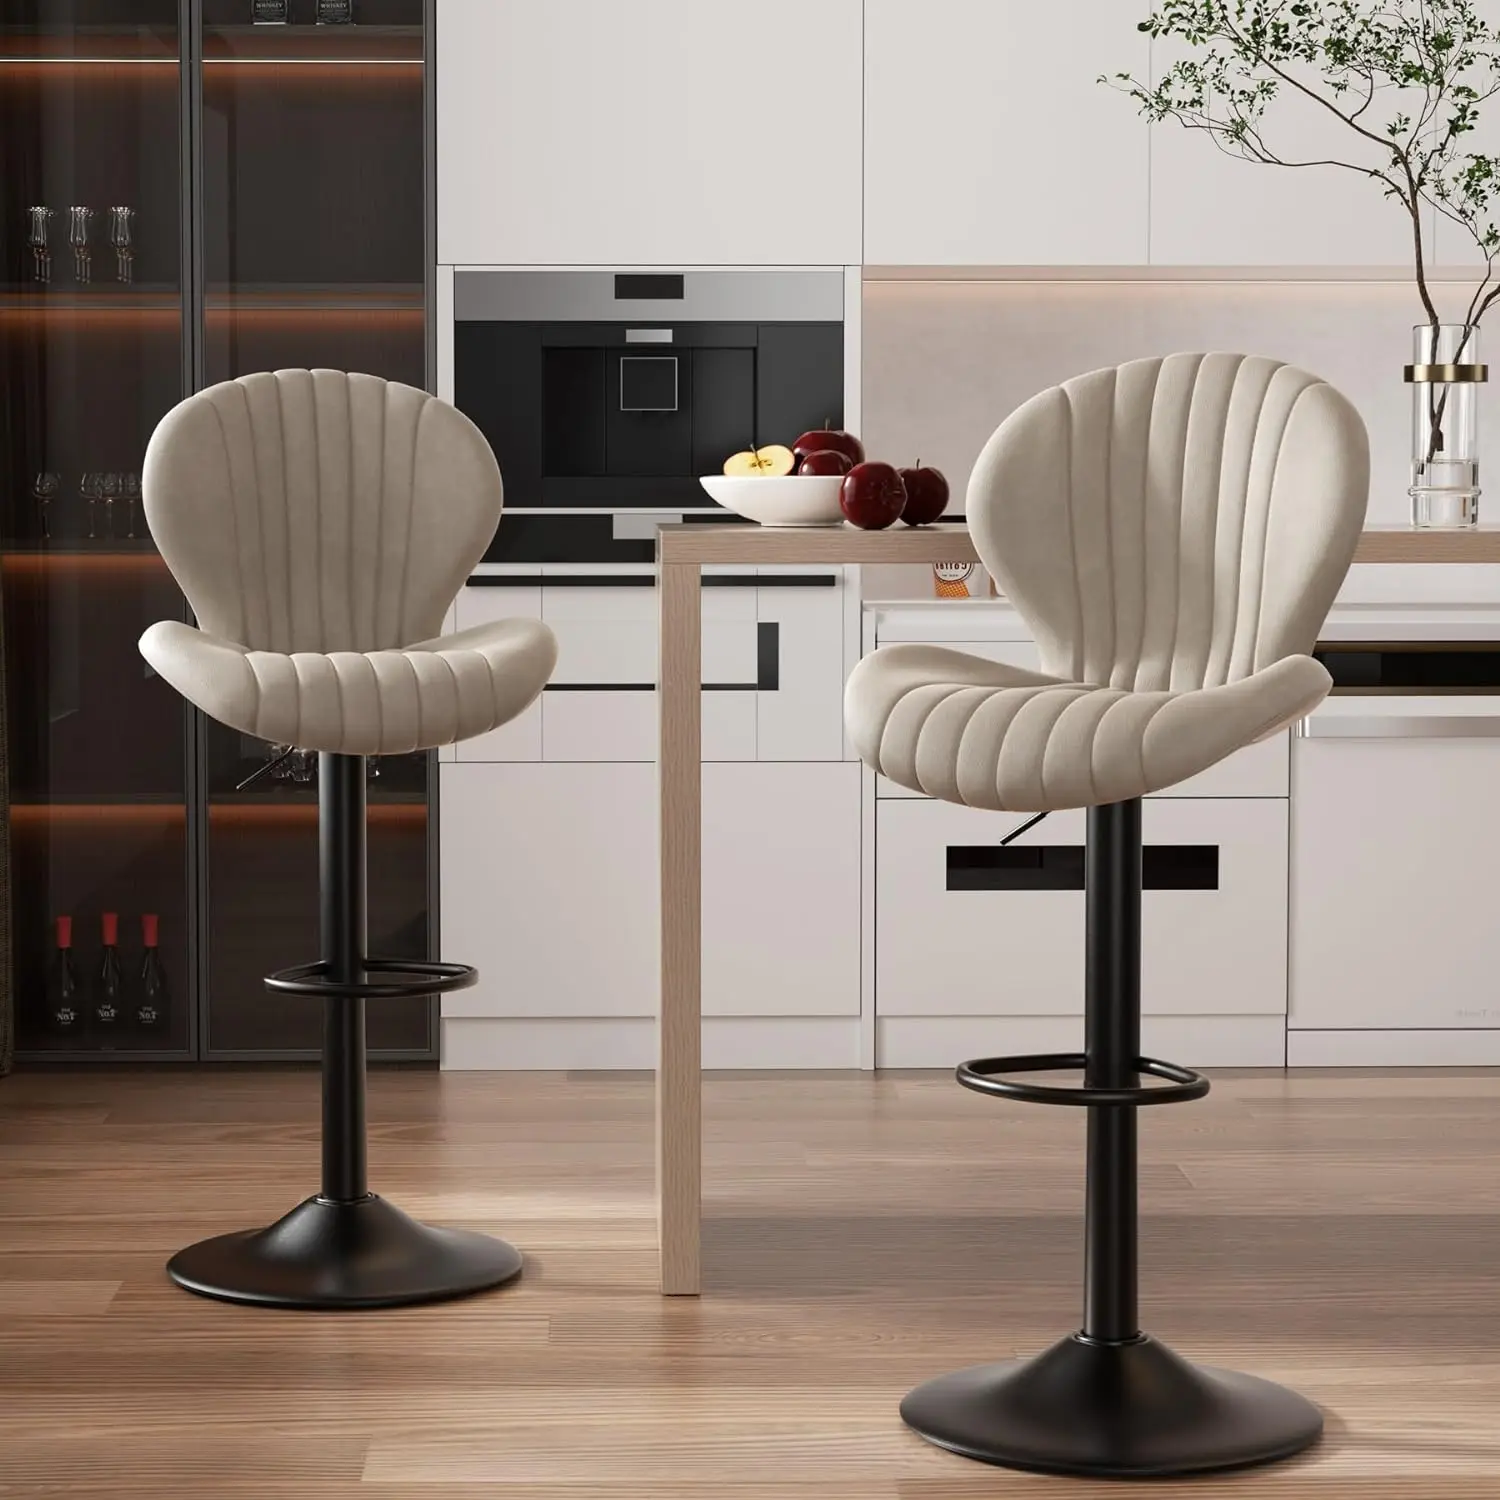 

Bar Stools Set of 2 Modern Swivel Bar Chairs, Barstools Counter Height with High Backrest, Easy 3-5 Minute Assembly for Bar